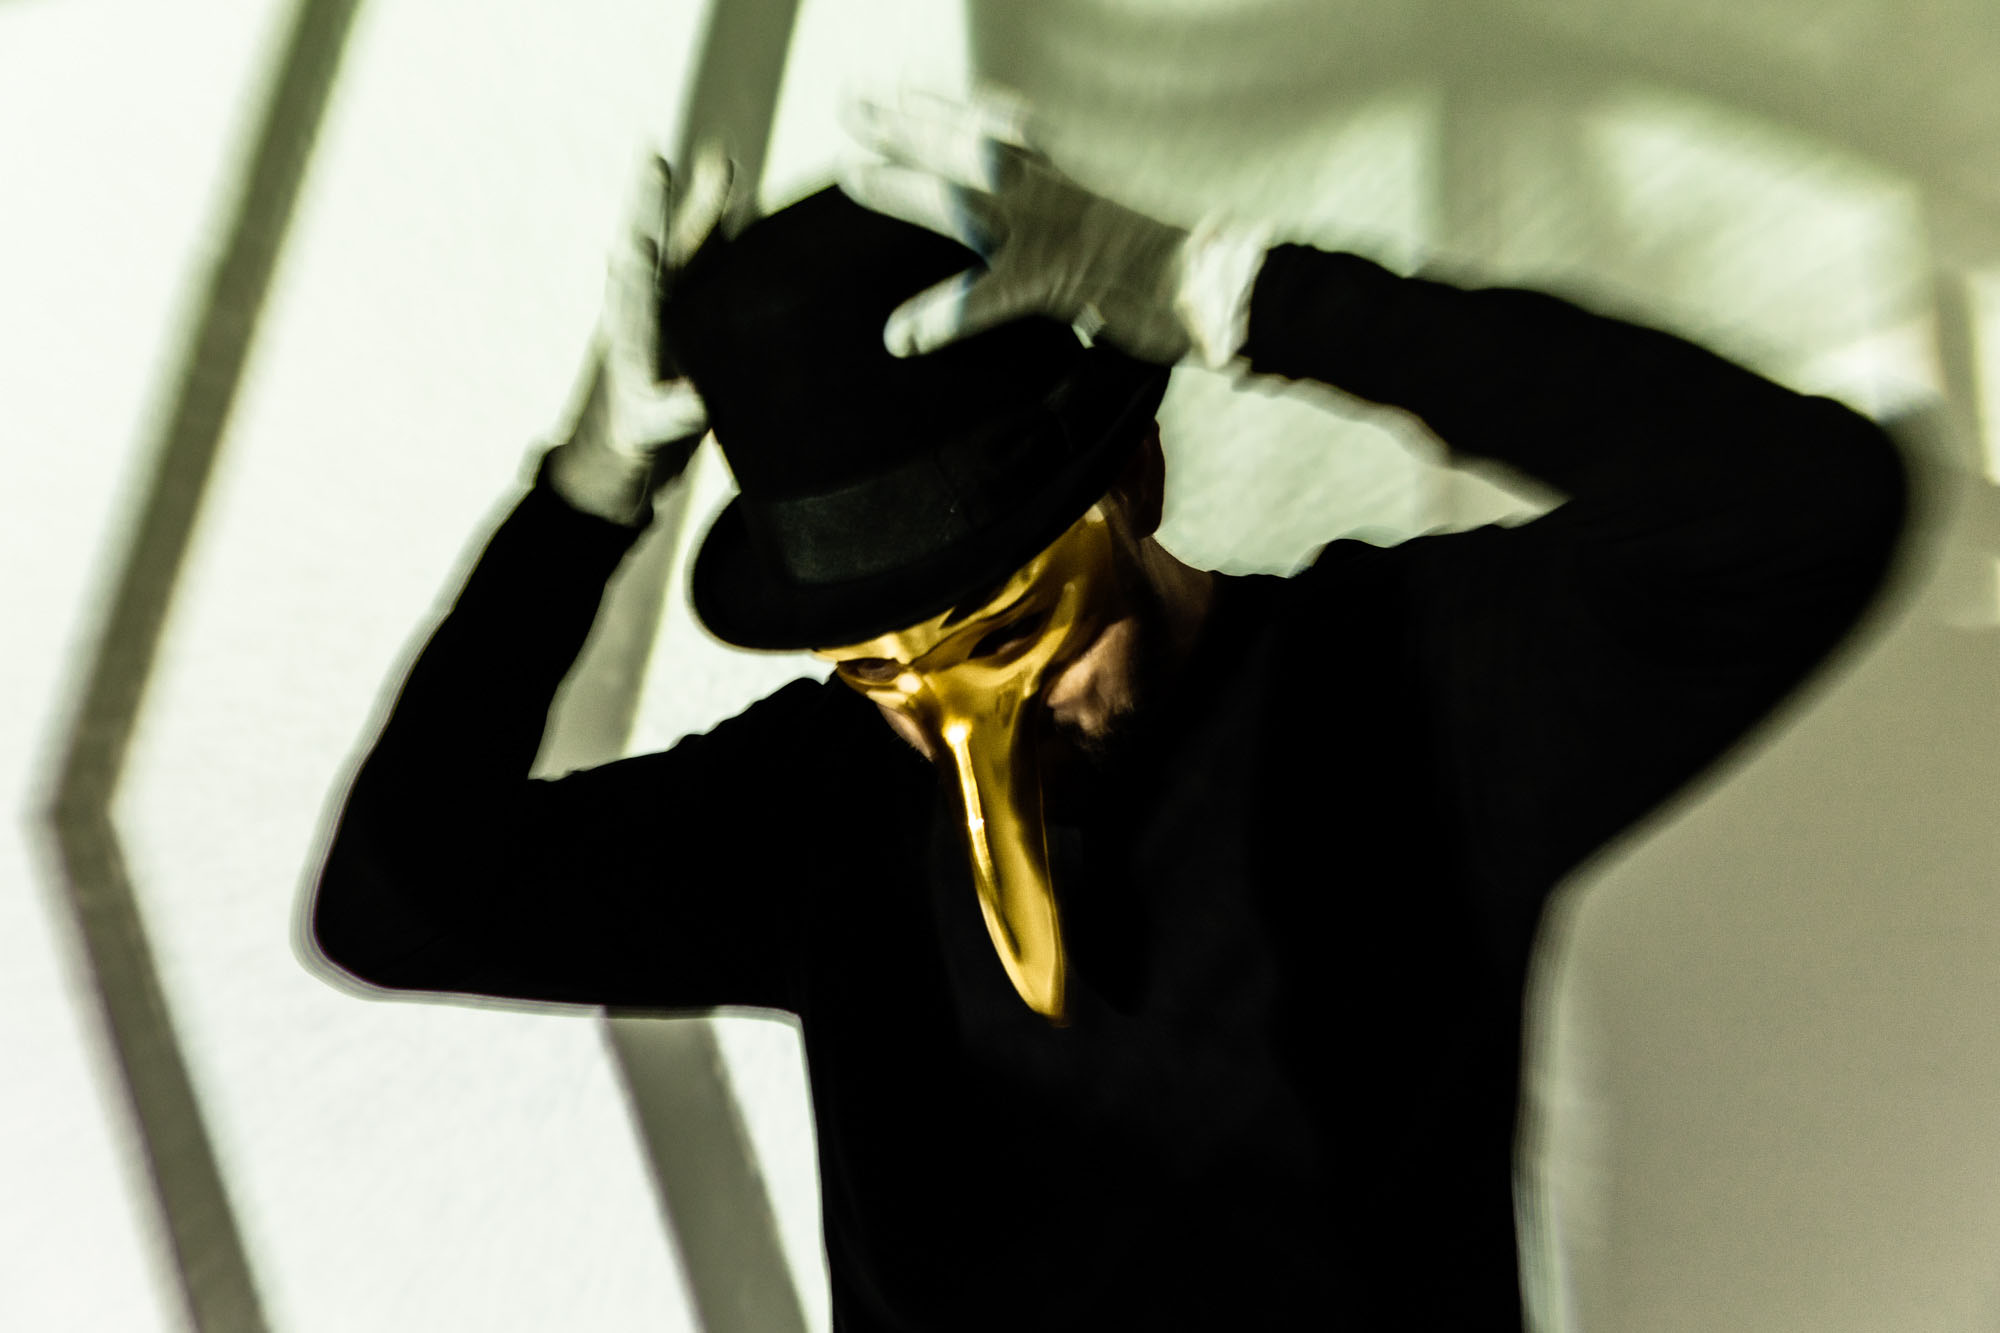 The mysterious DJ and producer CLAPTONE announces his new and forthcoming third studio album, Closer 